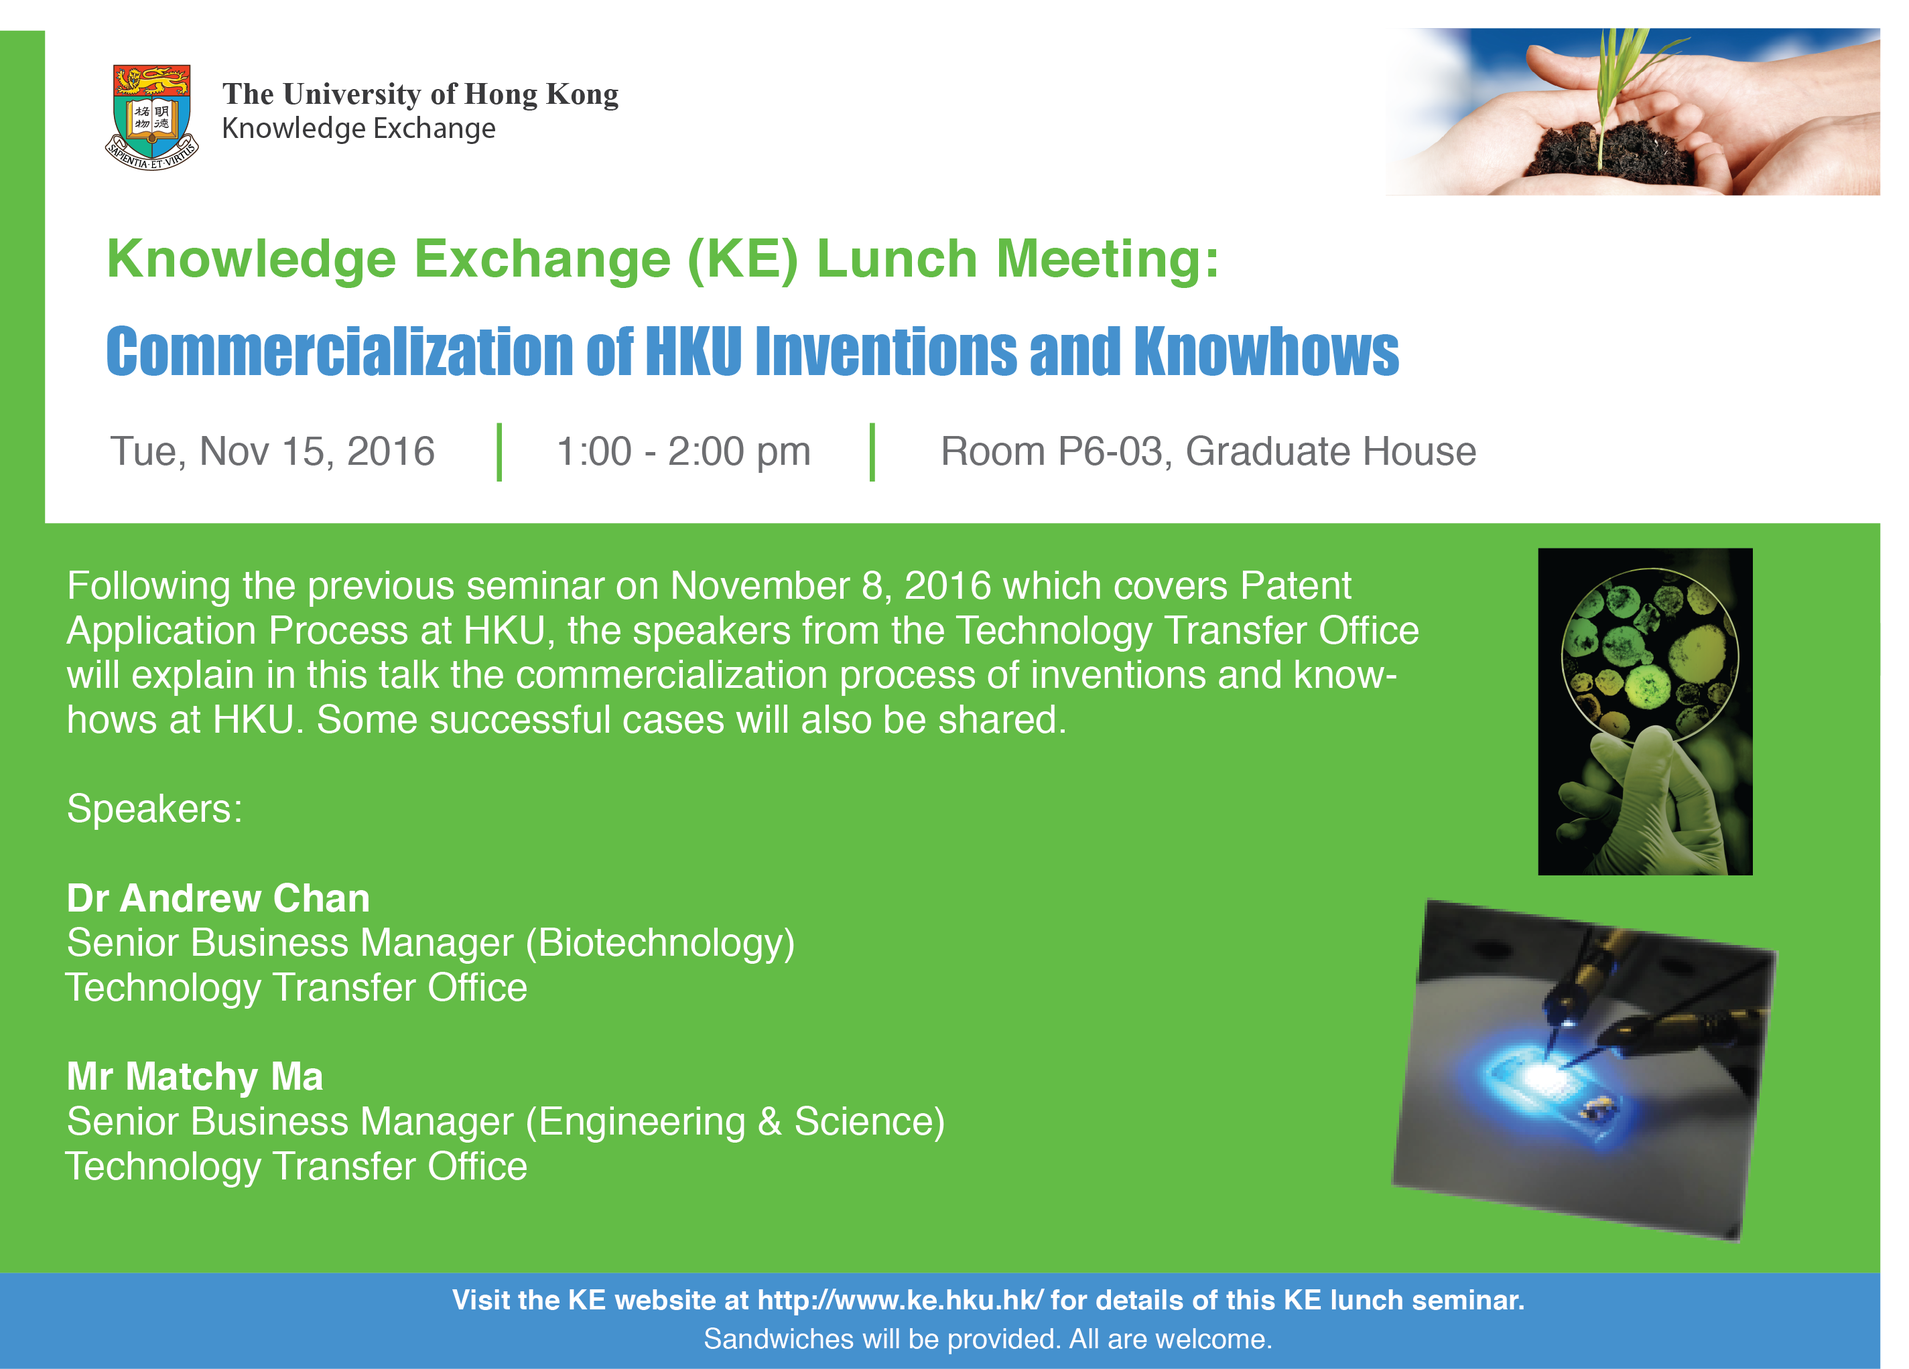 Commercialization of HKU Inventions and Knowhows